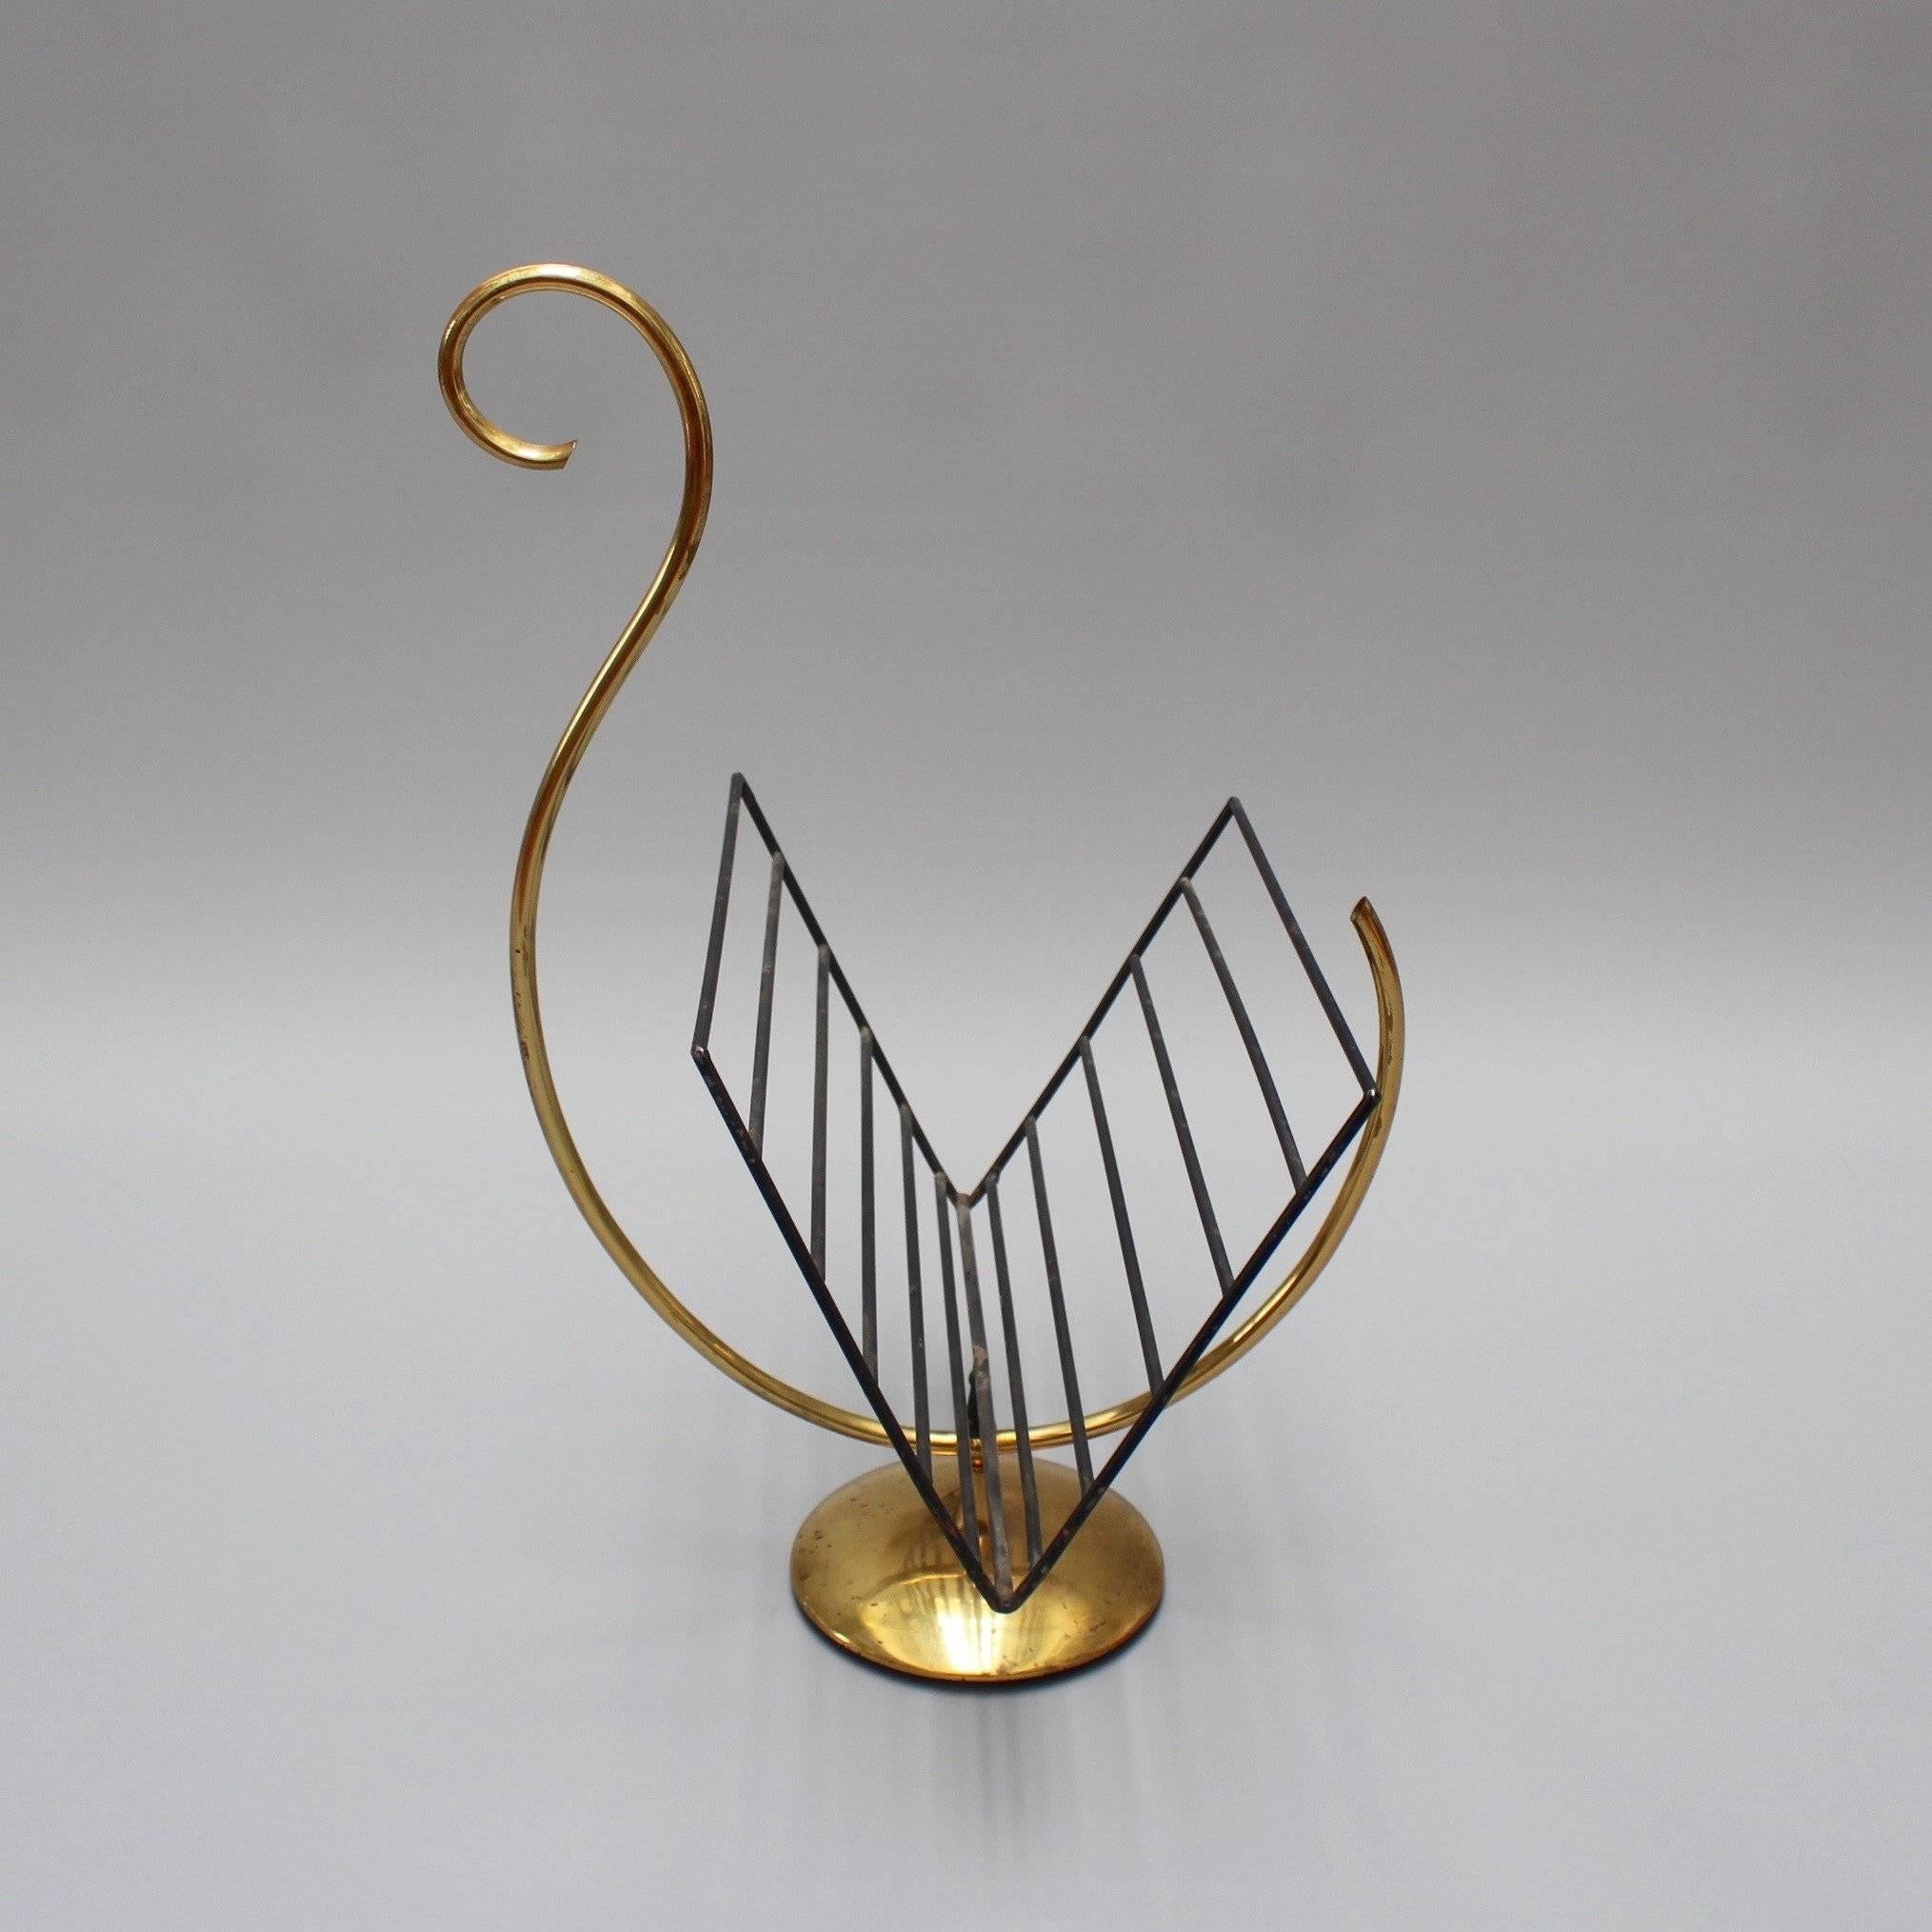 This is possibly the most elegant magazine stand we've ever seen and a rare beauty - we've never come upon one like it before. Italian, 1950s and the perfect choice for anyone who simply loves beautiful design. This gorgeously-curved music